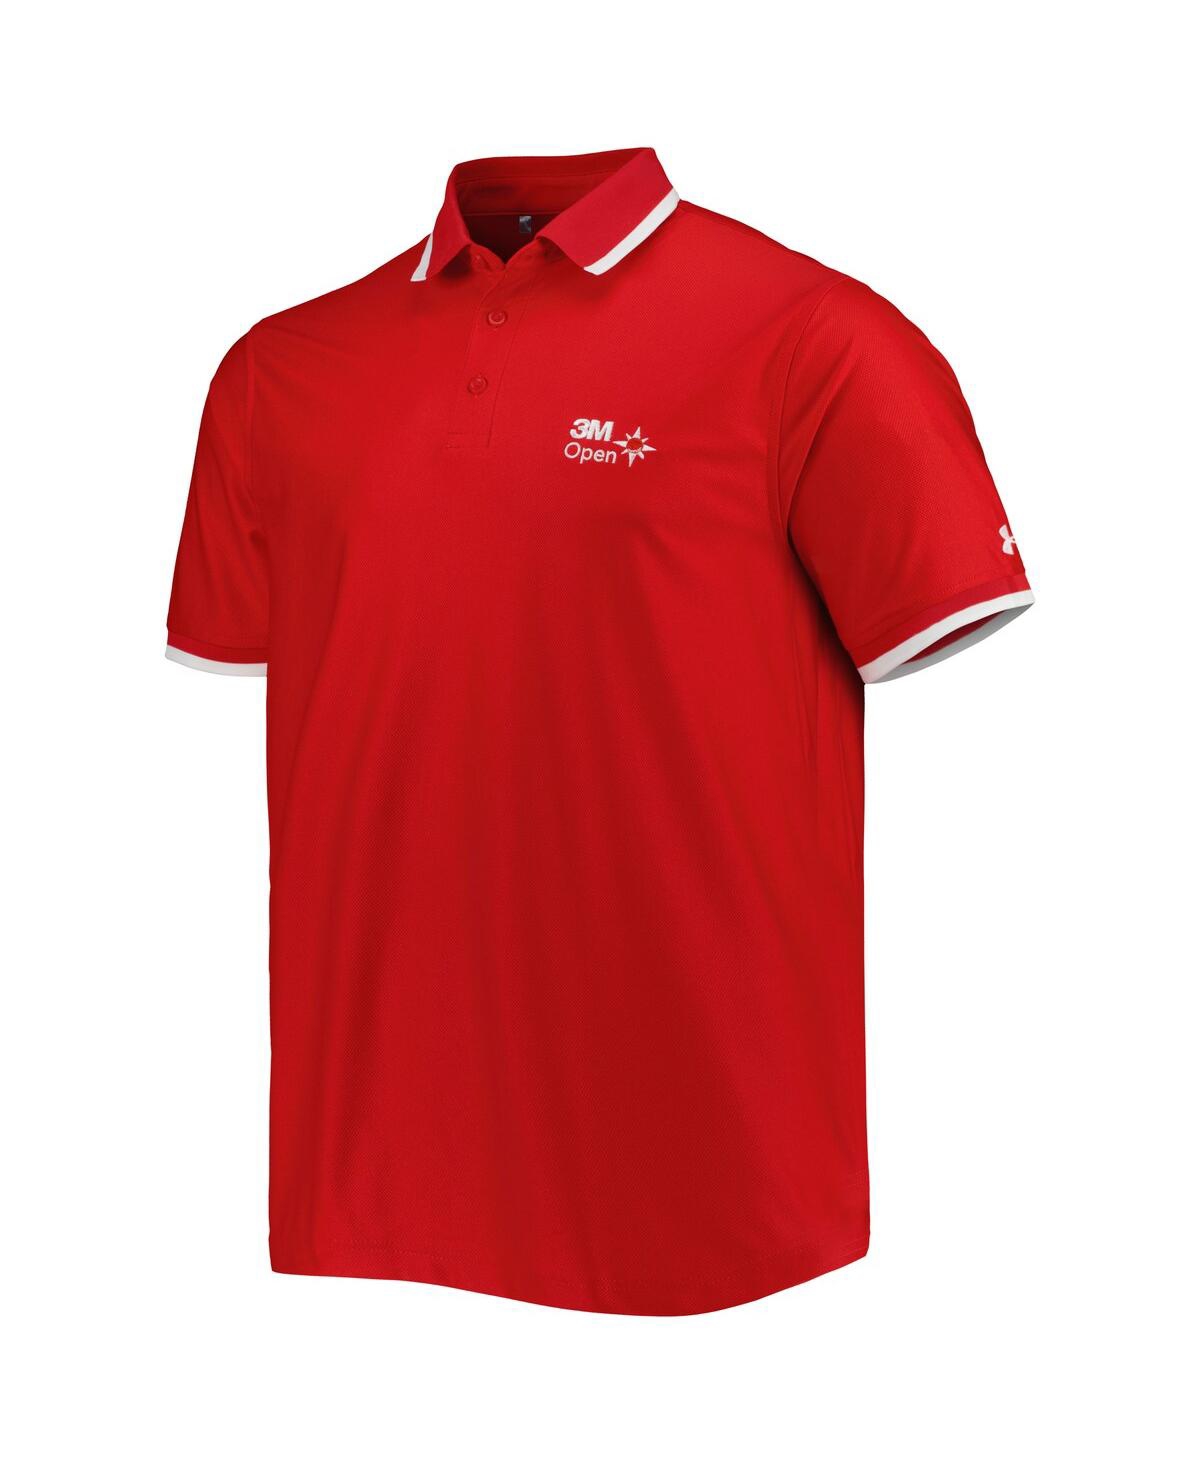 Shop Under Armour Men's  Red 3m Open Playoff 2.0 Pique Performance Polo Shirt